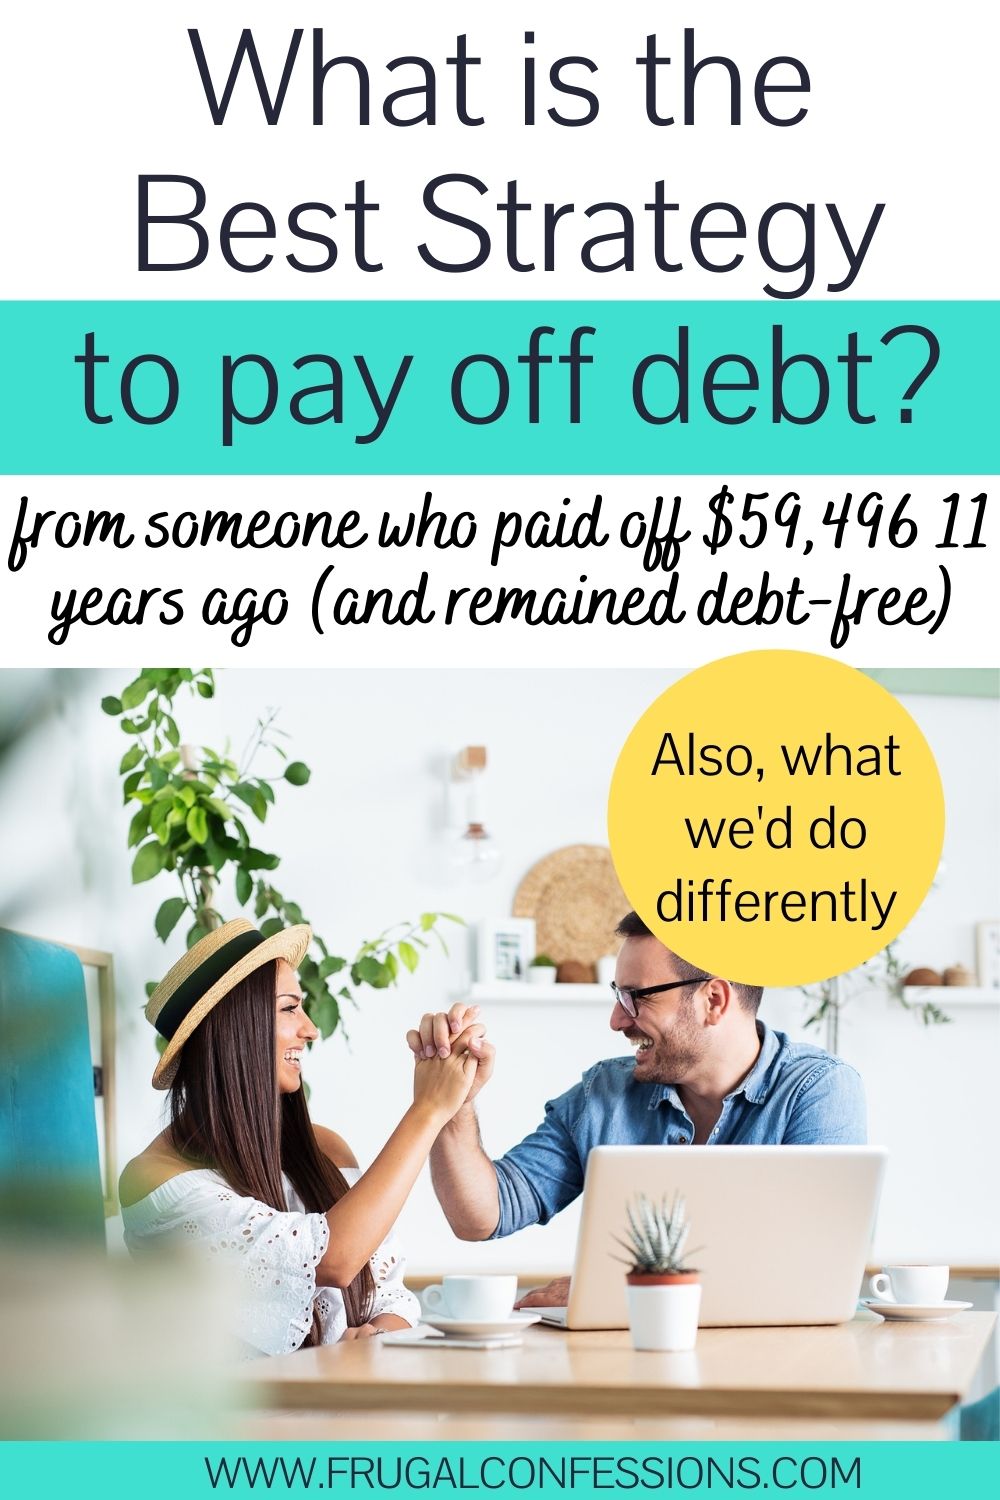 couple slapping each other five for job well done, text overlay "what is the best strategy to pay off debt?"